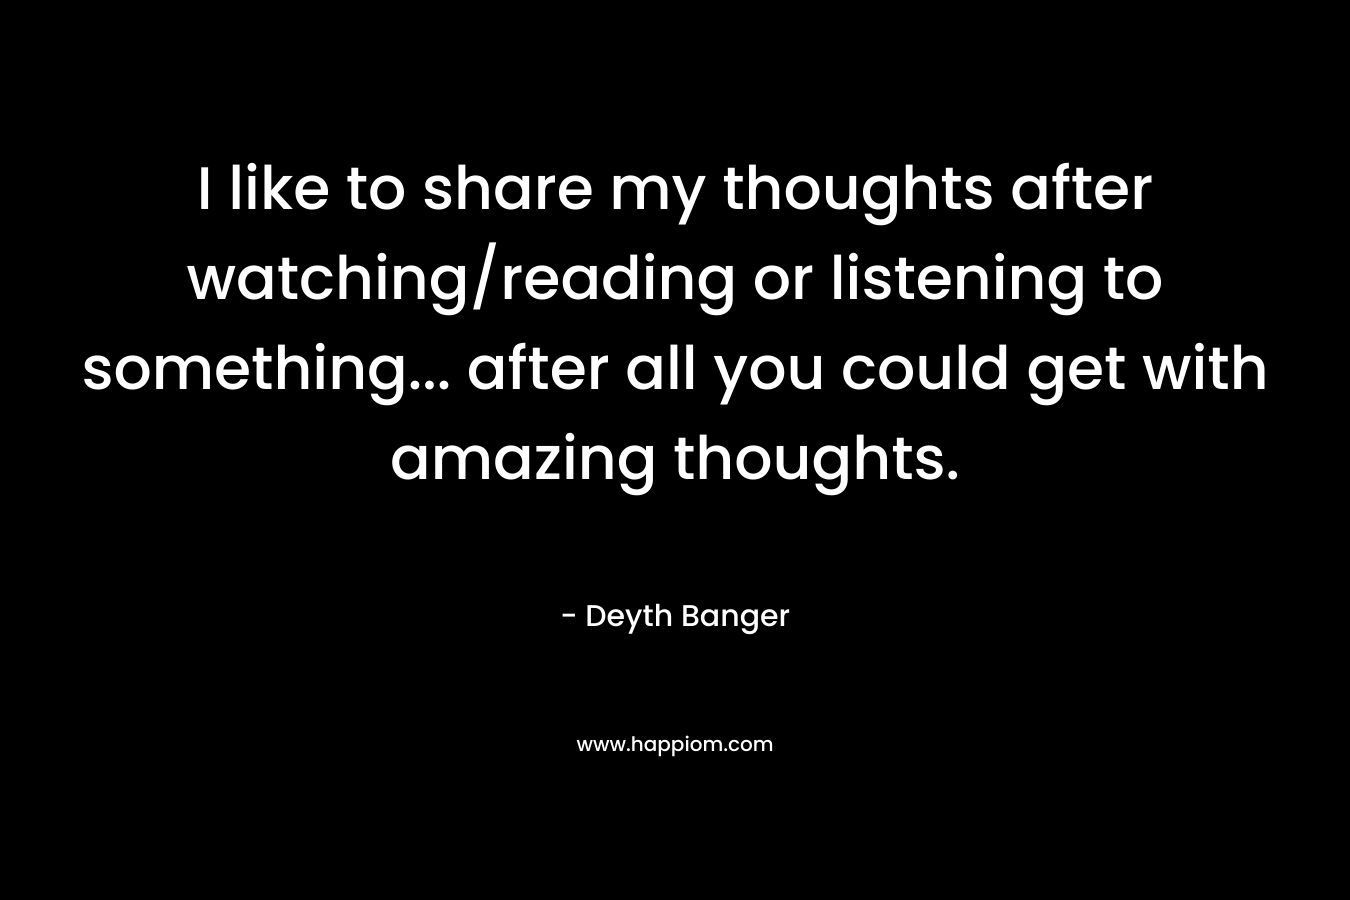 I like to share my thoughts after watching/reading or listening to something... after all you could get with amazing thoughts.